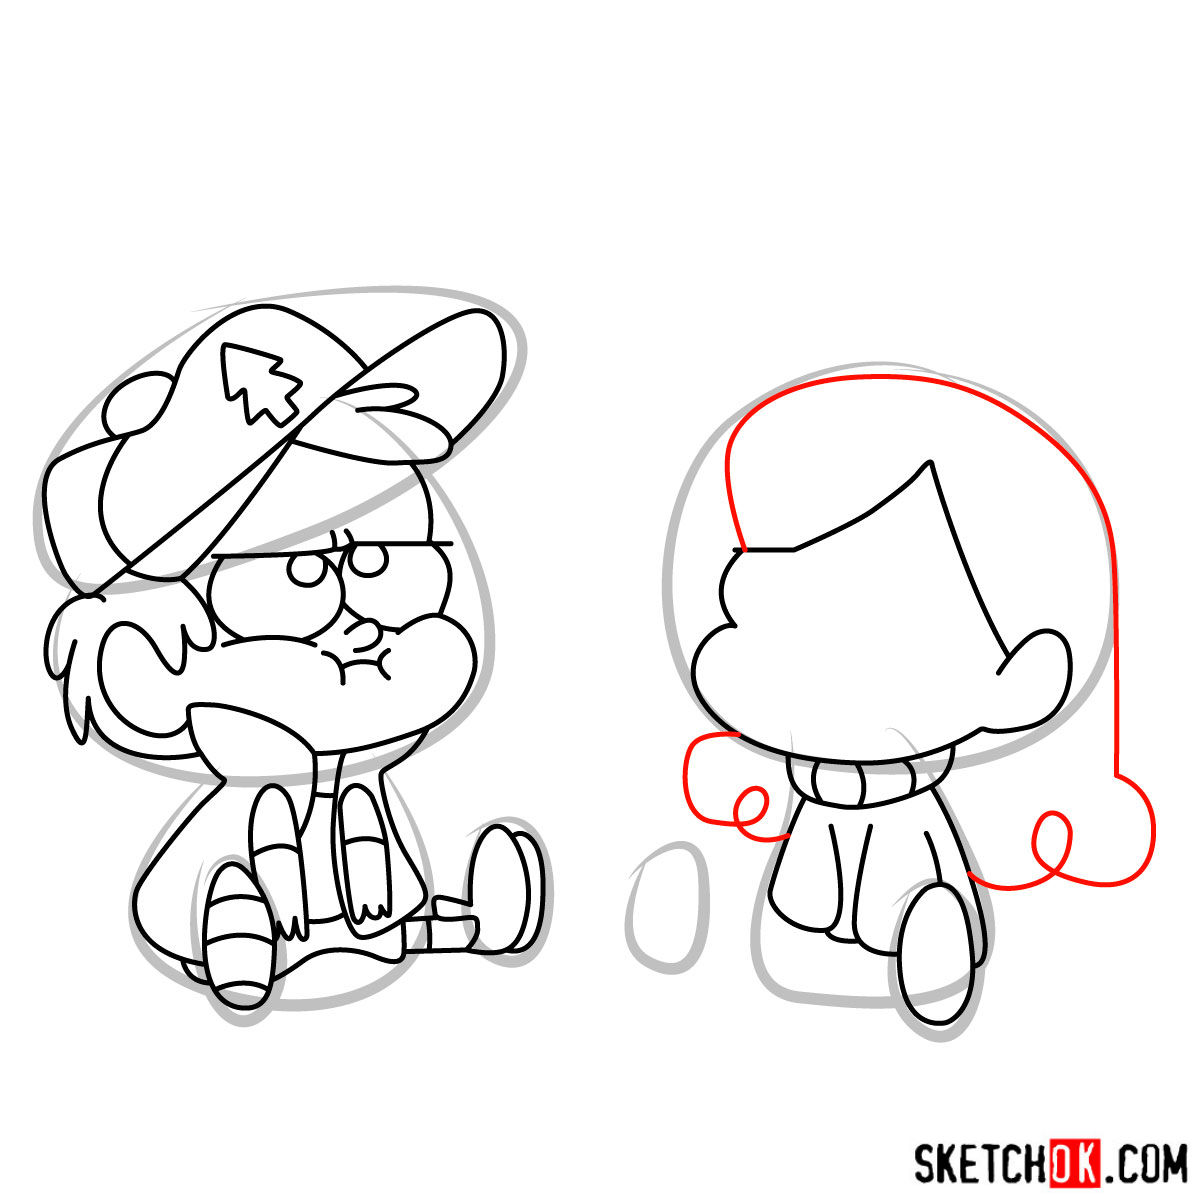 How to draw Dipper and Mabel Pines chibi style - step 11